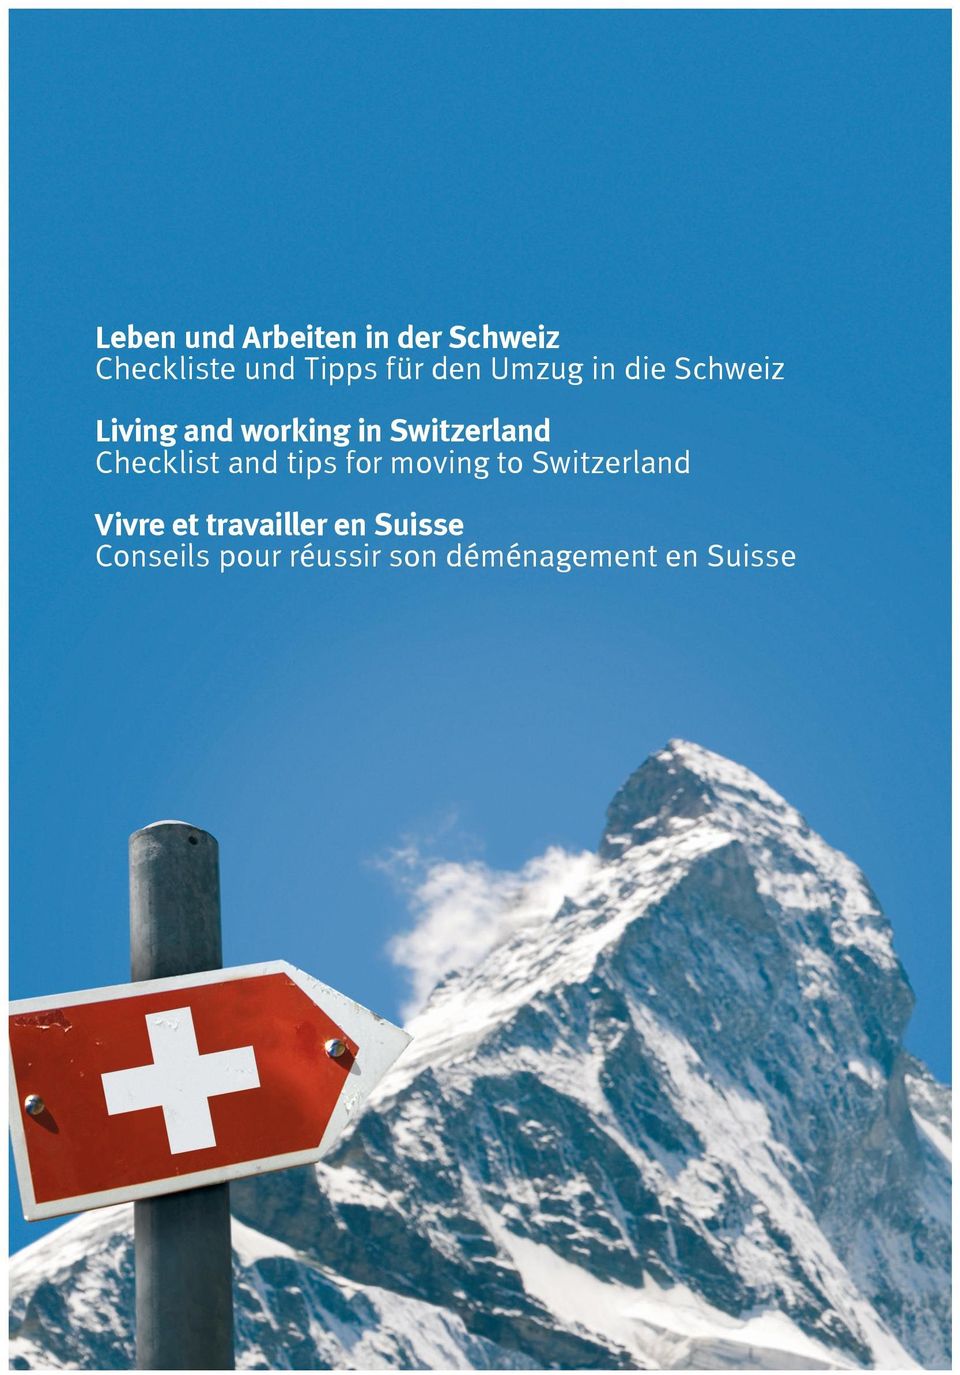 Checklist and tips for moving to Switzerland Vivre et